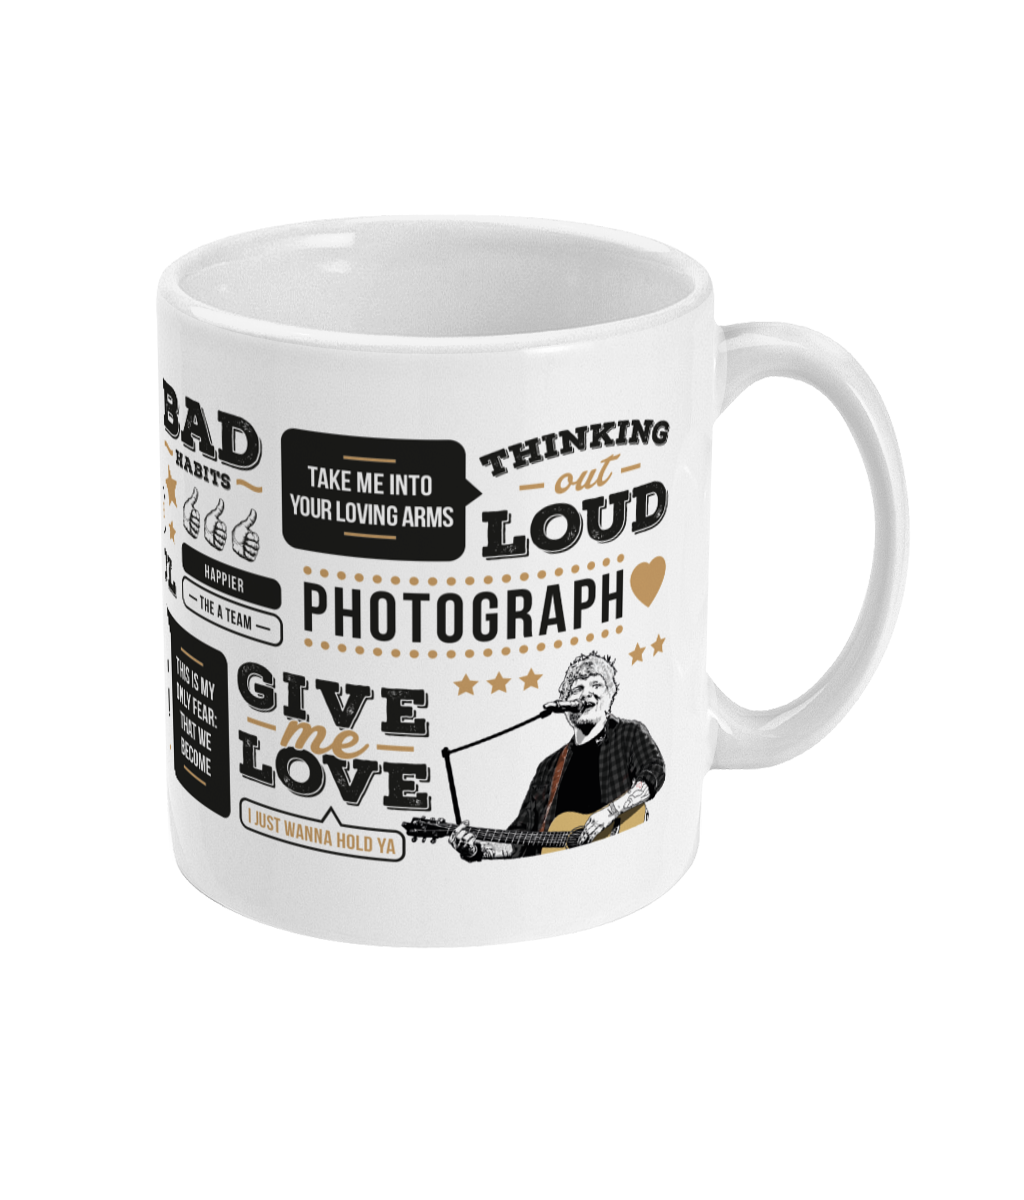 Mug featuring illustration of Ed Sheeran and includes the names of some of his most popular lines from his most loved songs from over the years,